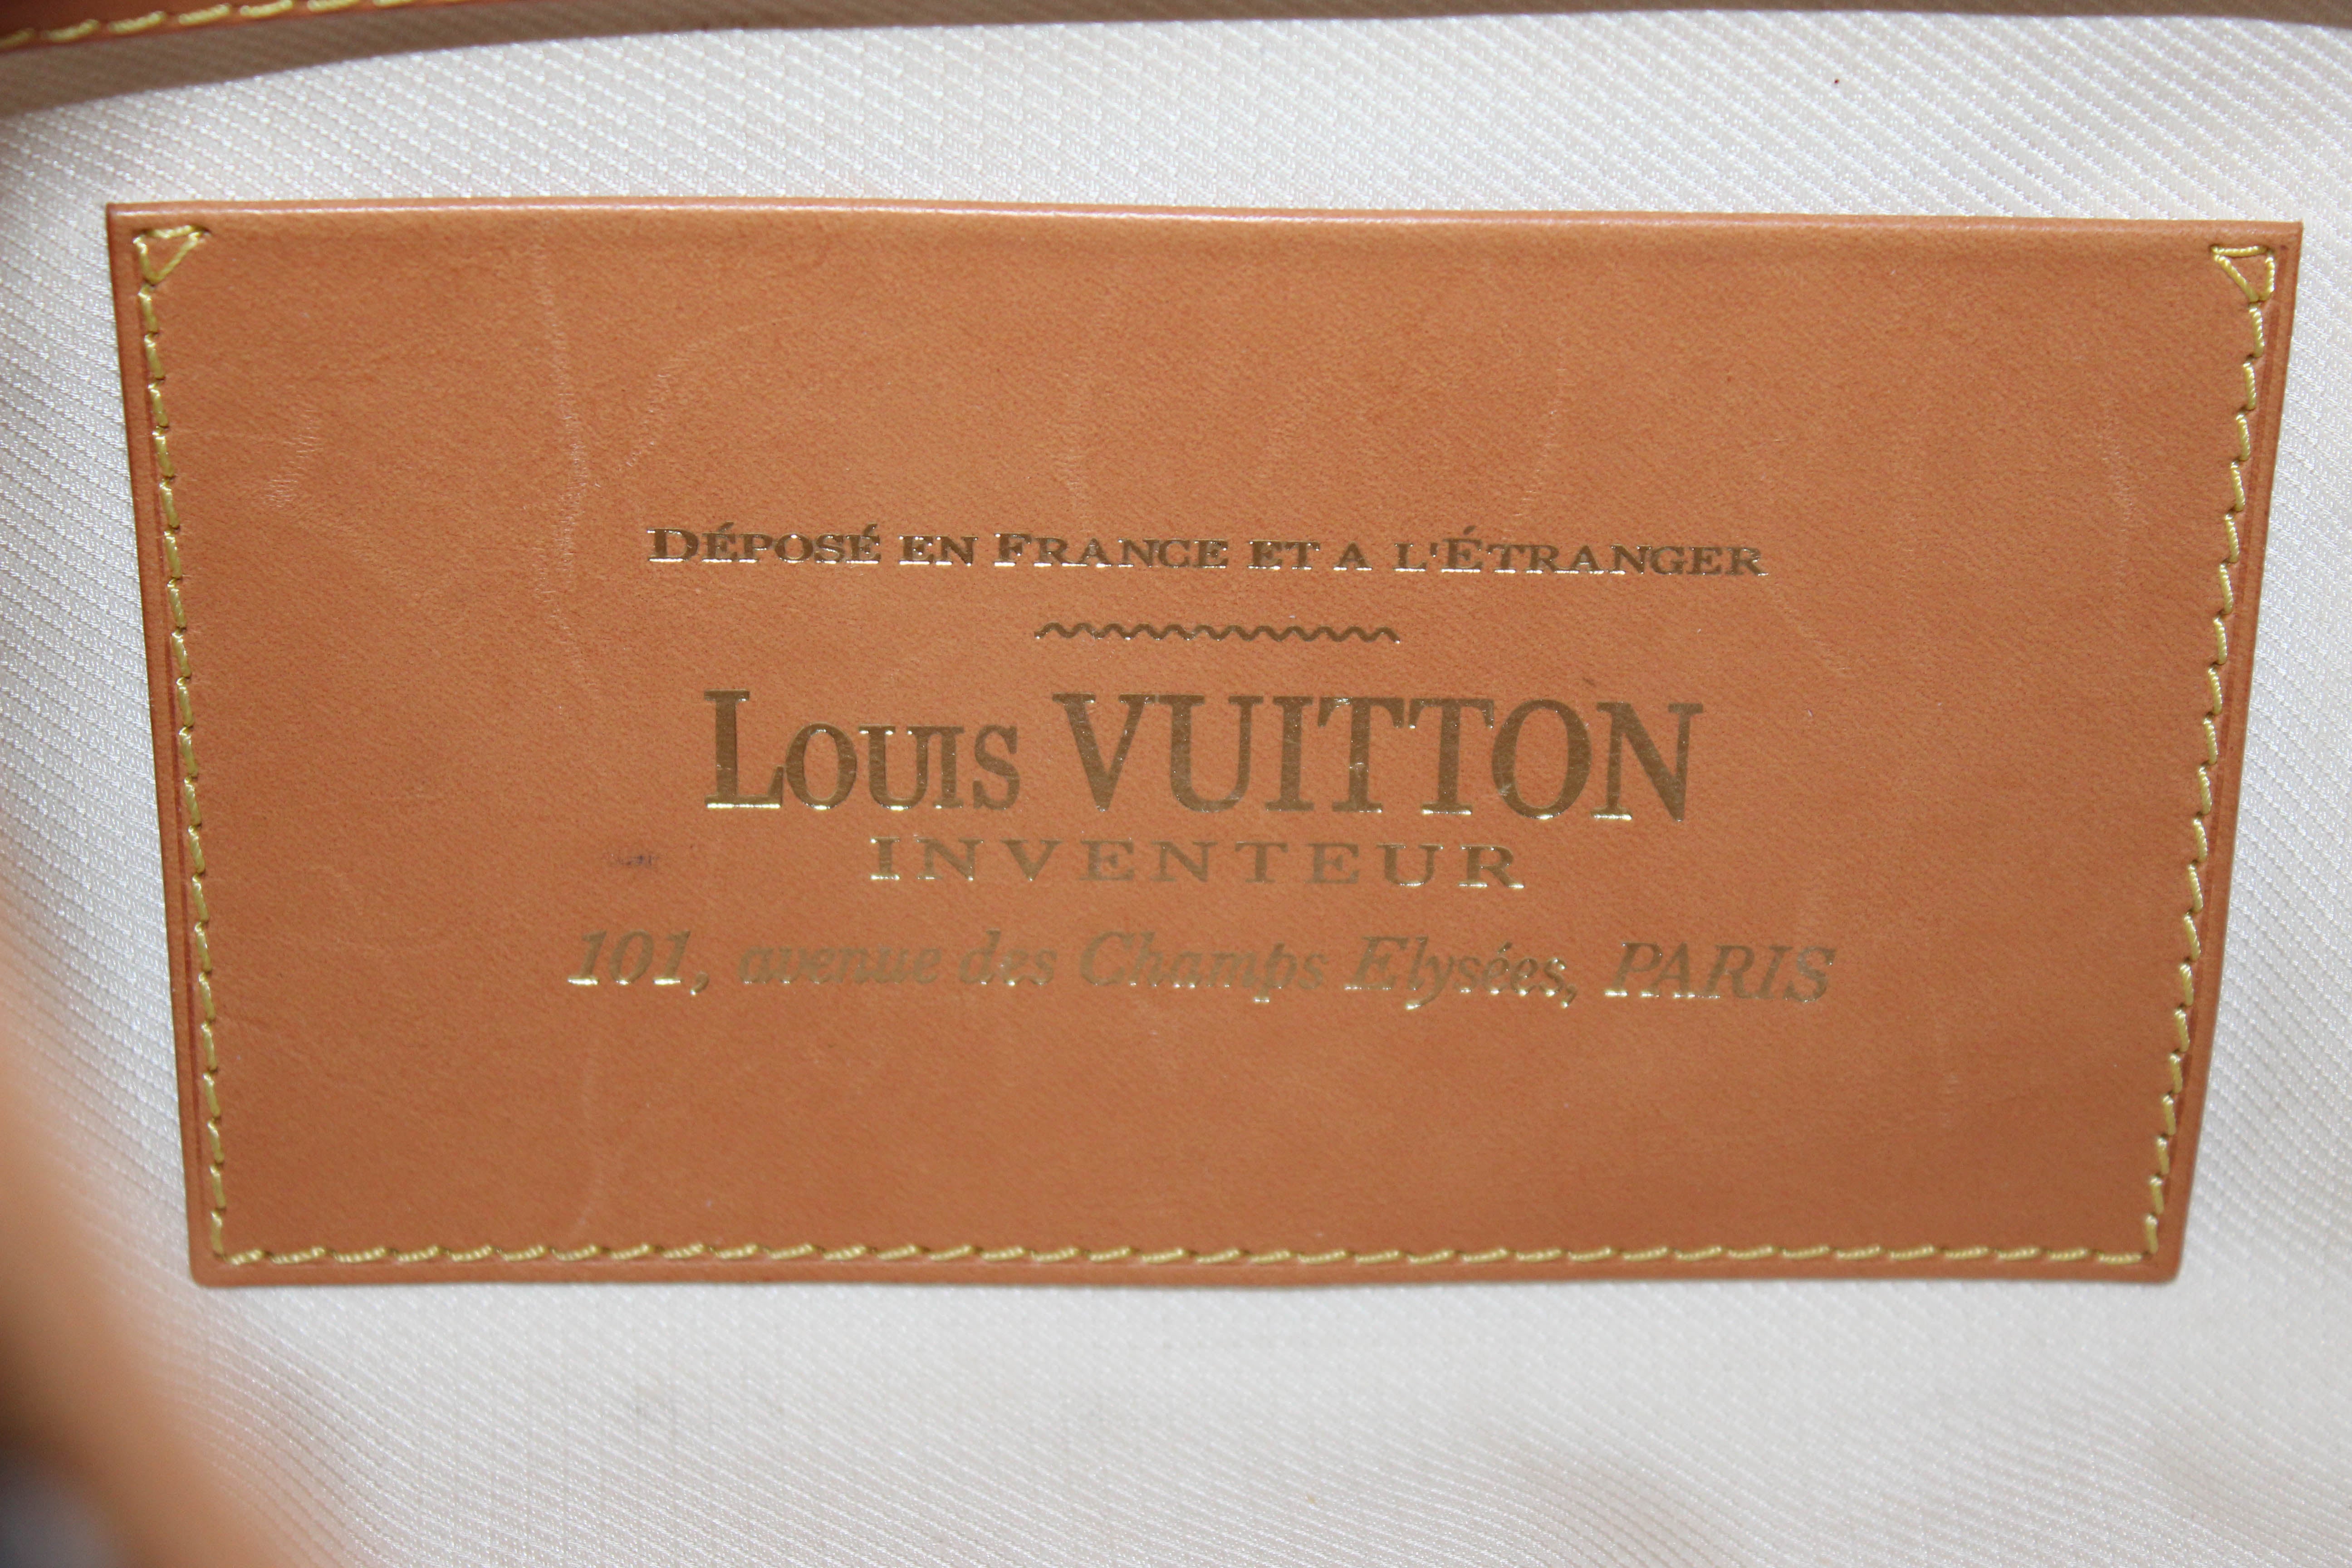 Louis Vuitton Monogram Limited Edition Bulles Mm Bag (pre-owned), Handbags, Clothing & Accessories